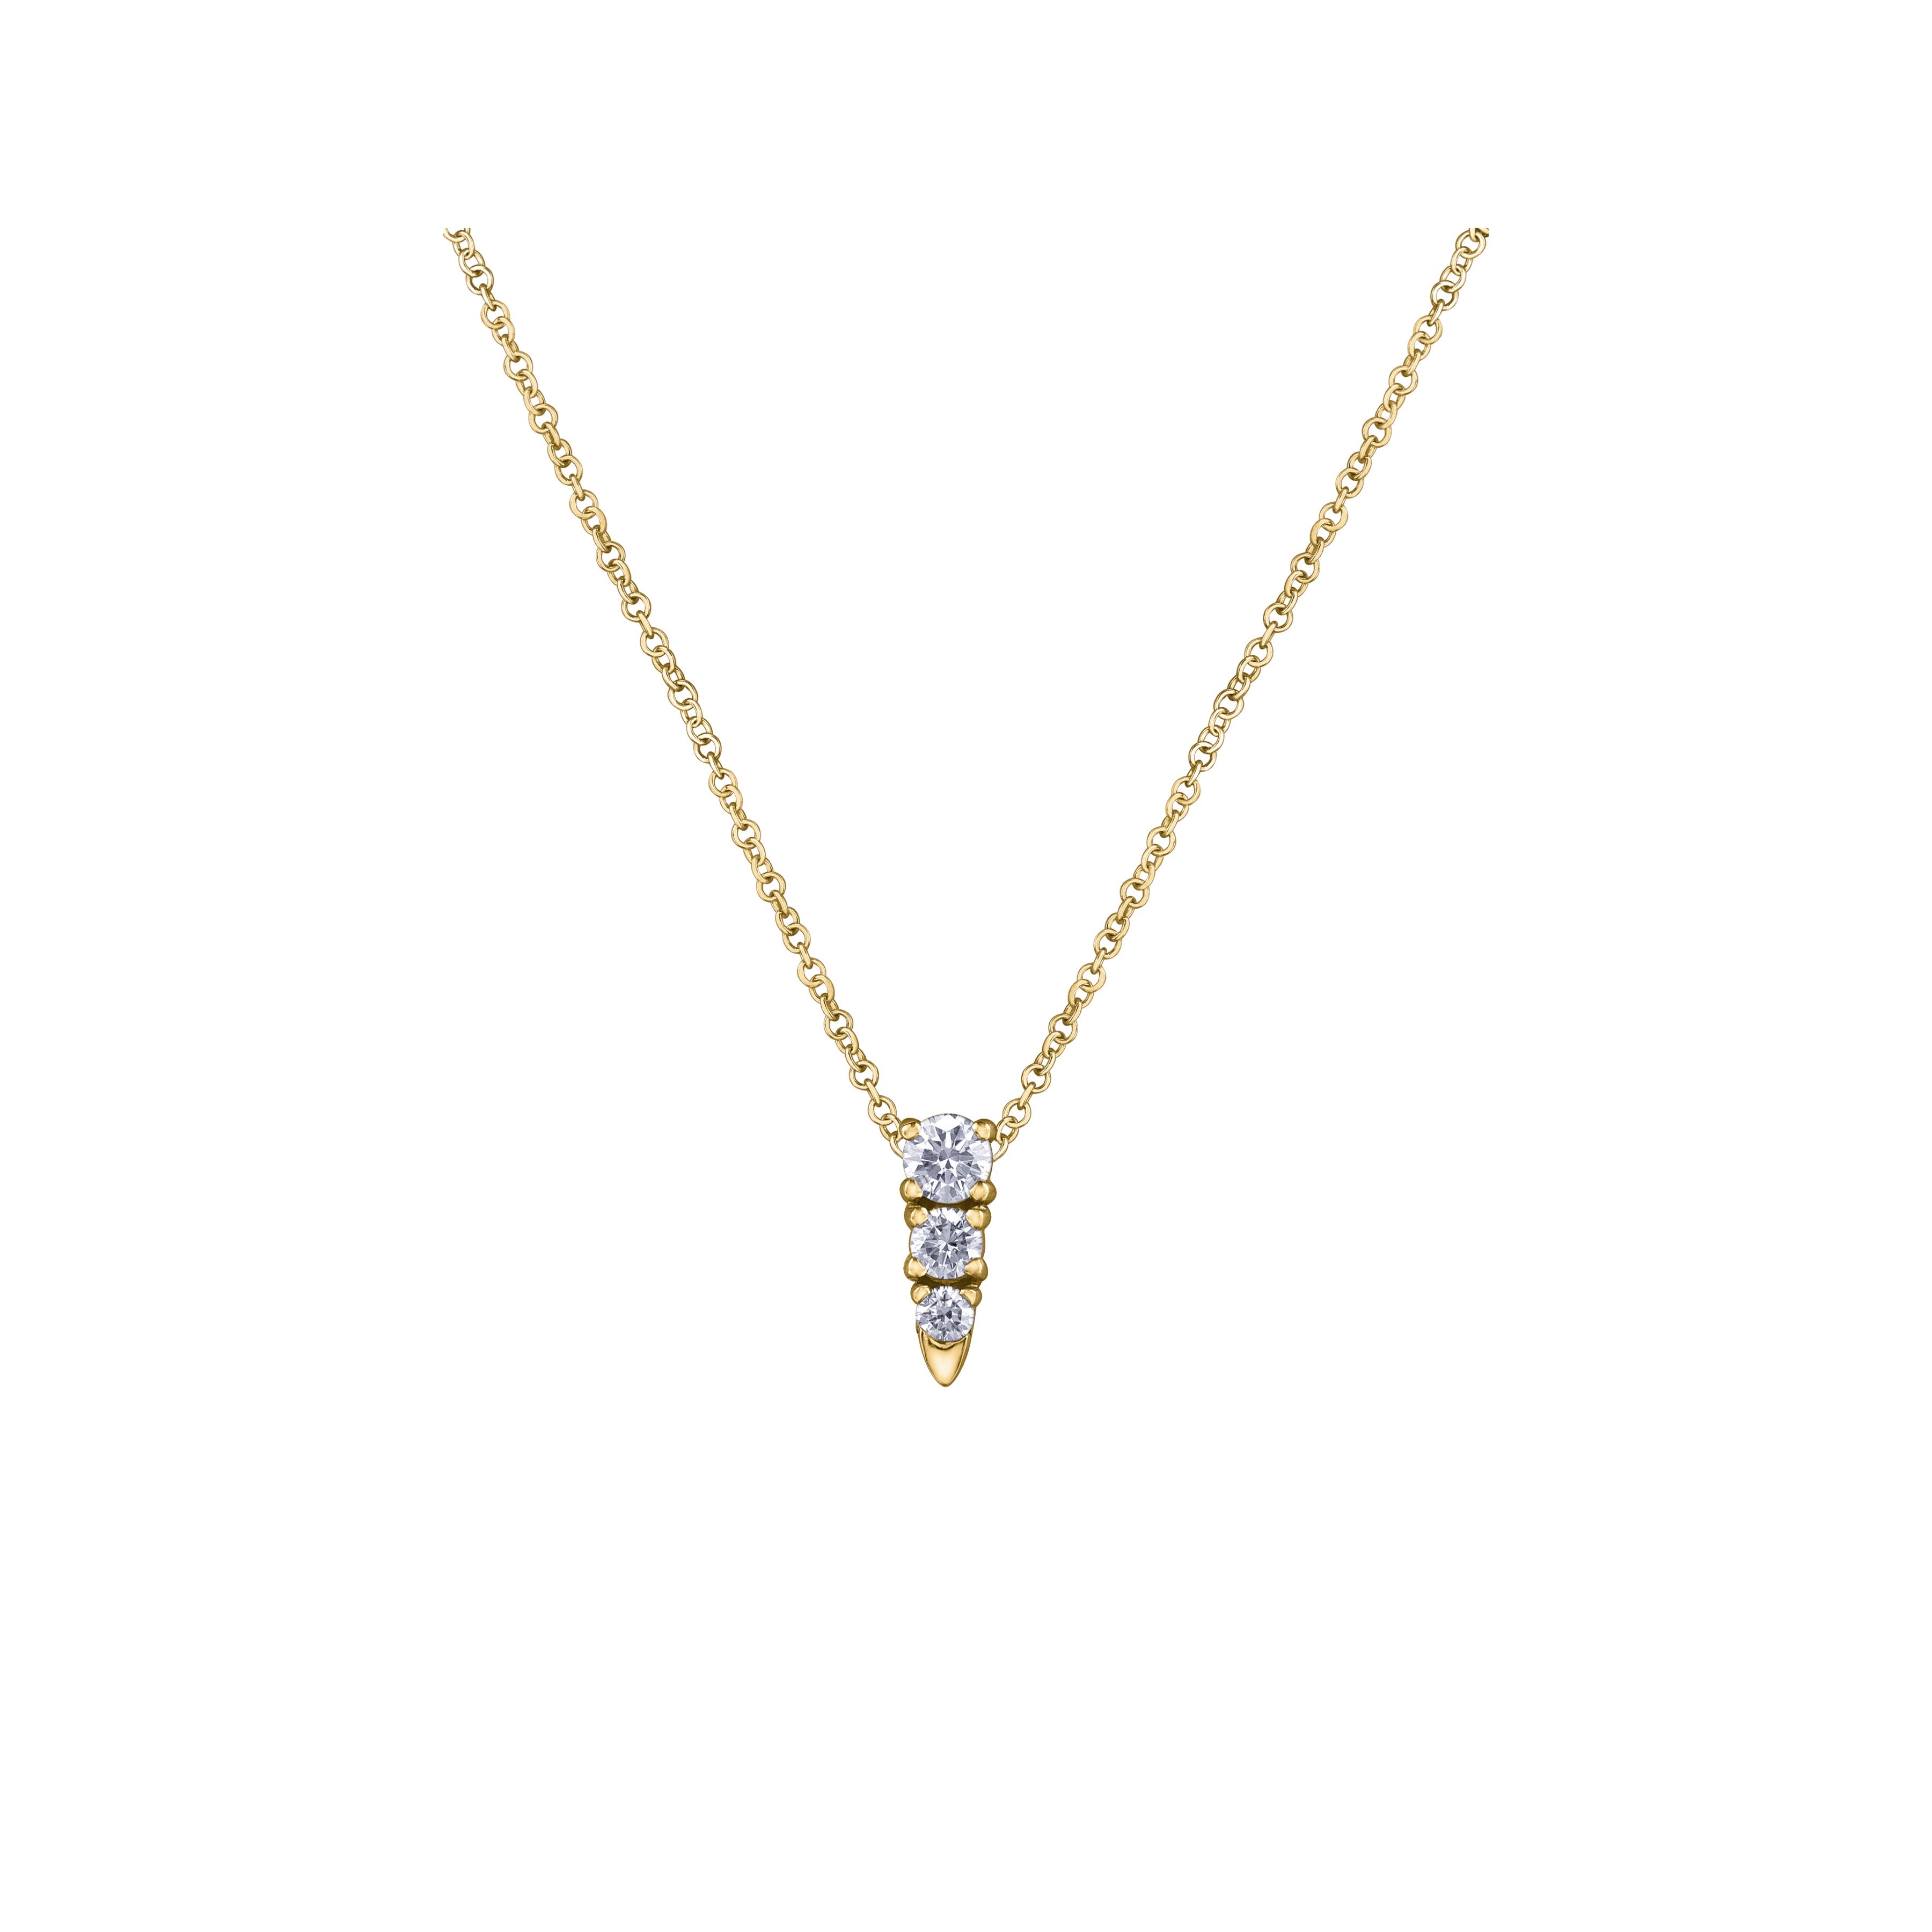 Crafted in 14KT white or yellow Certified Canadian Gold, this necklace features a baby icicle set with round brilliant-cut Canadian diamonds.